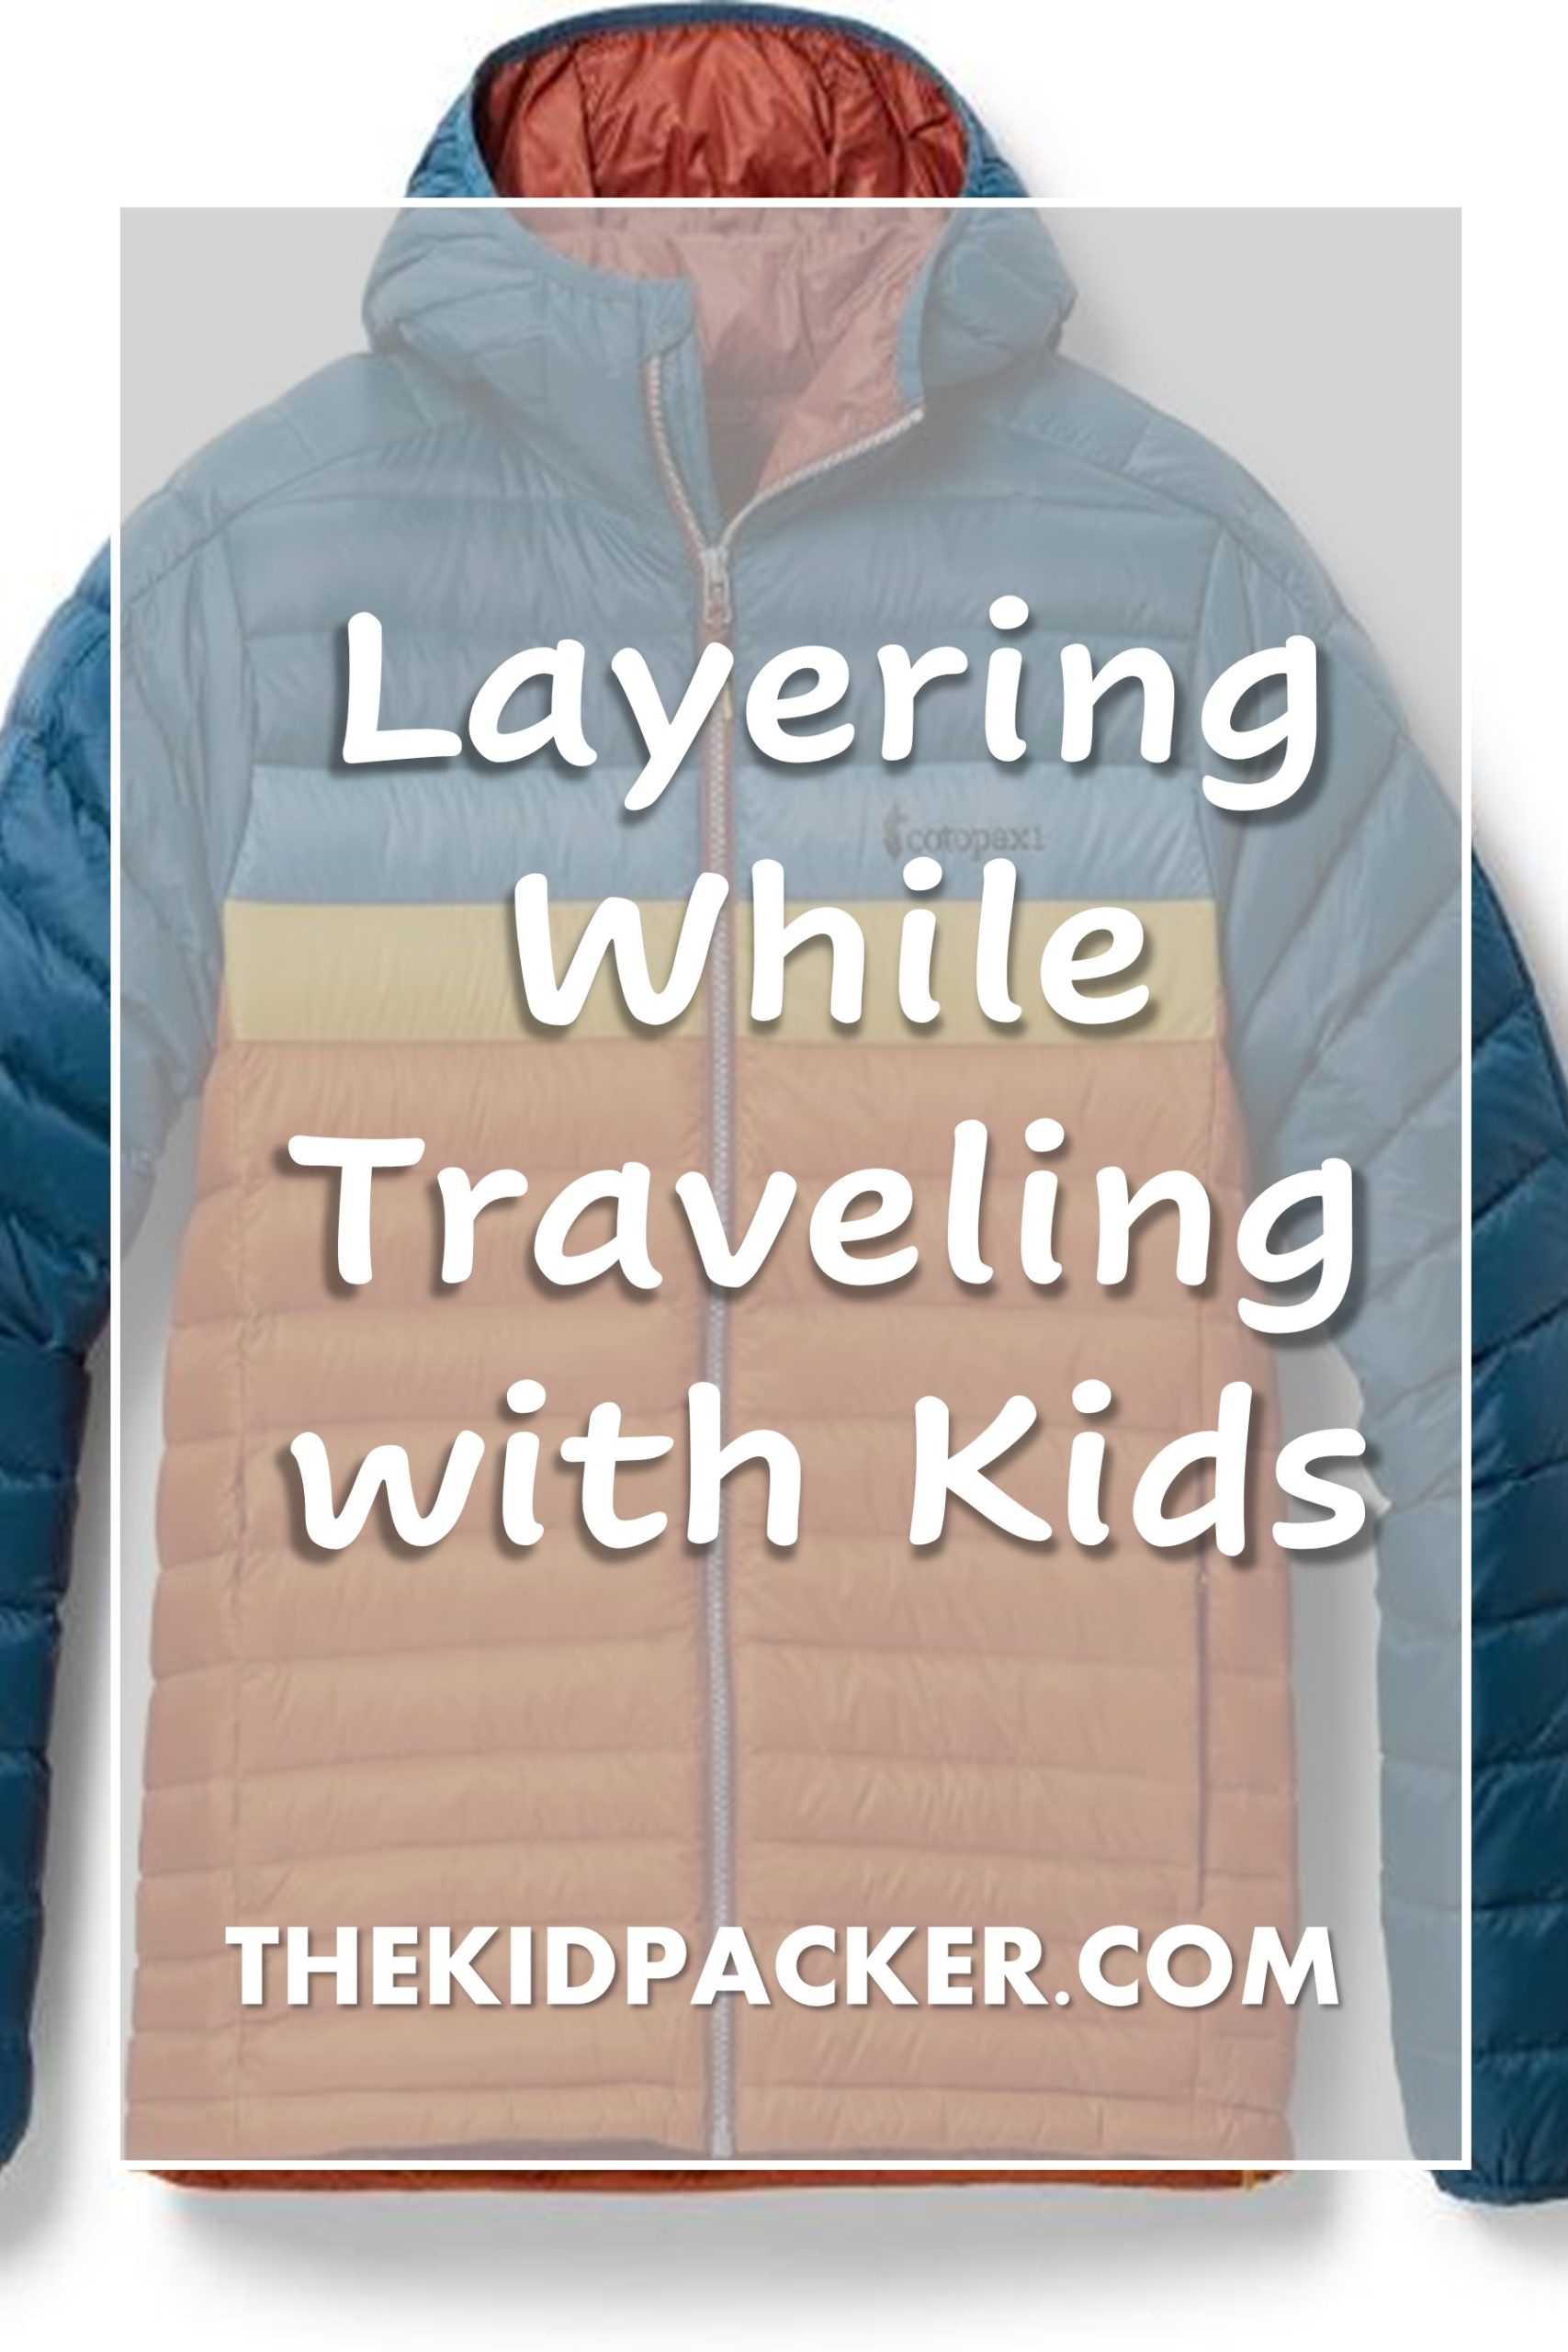 Layering while traveling with kids